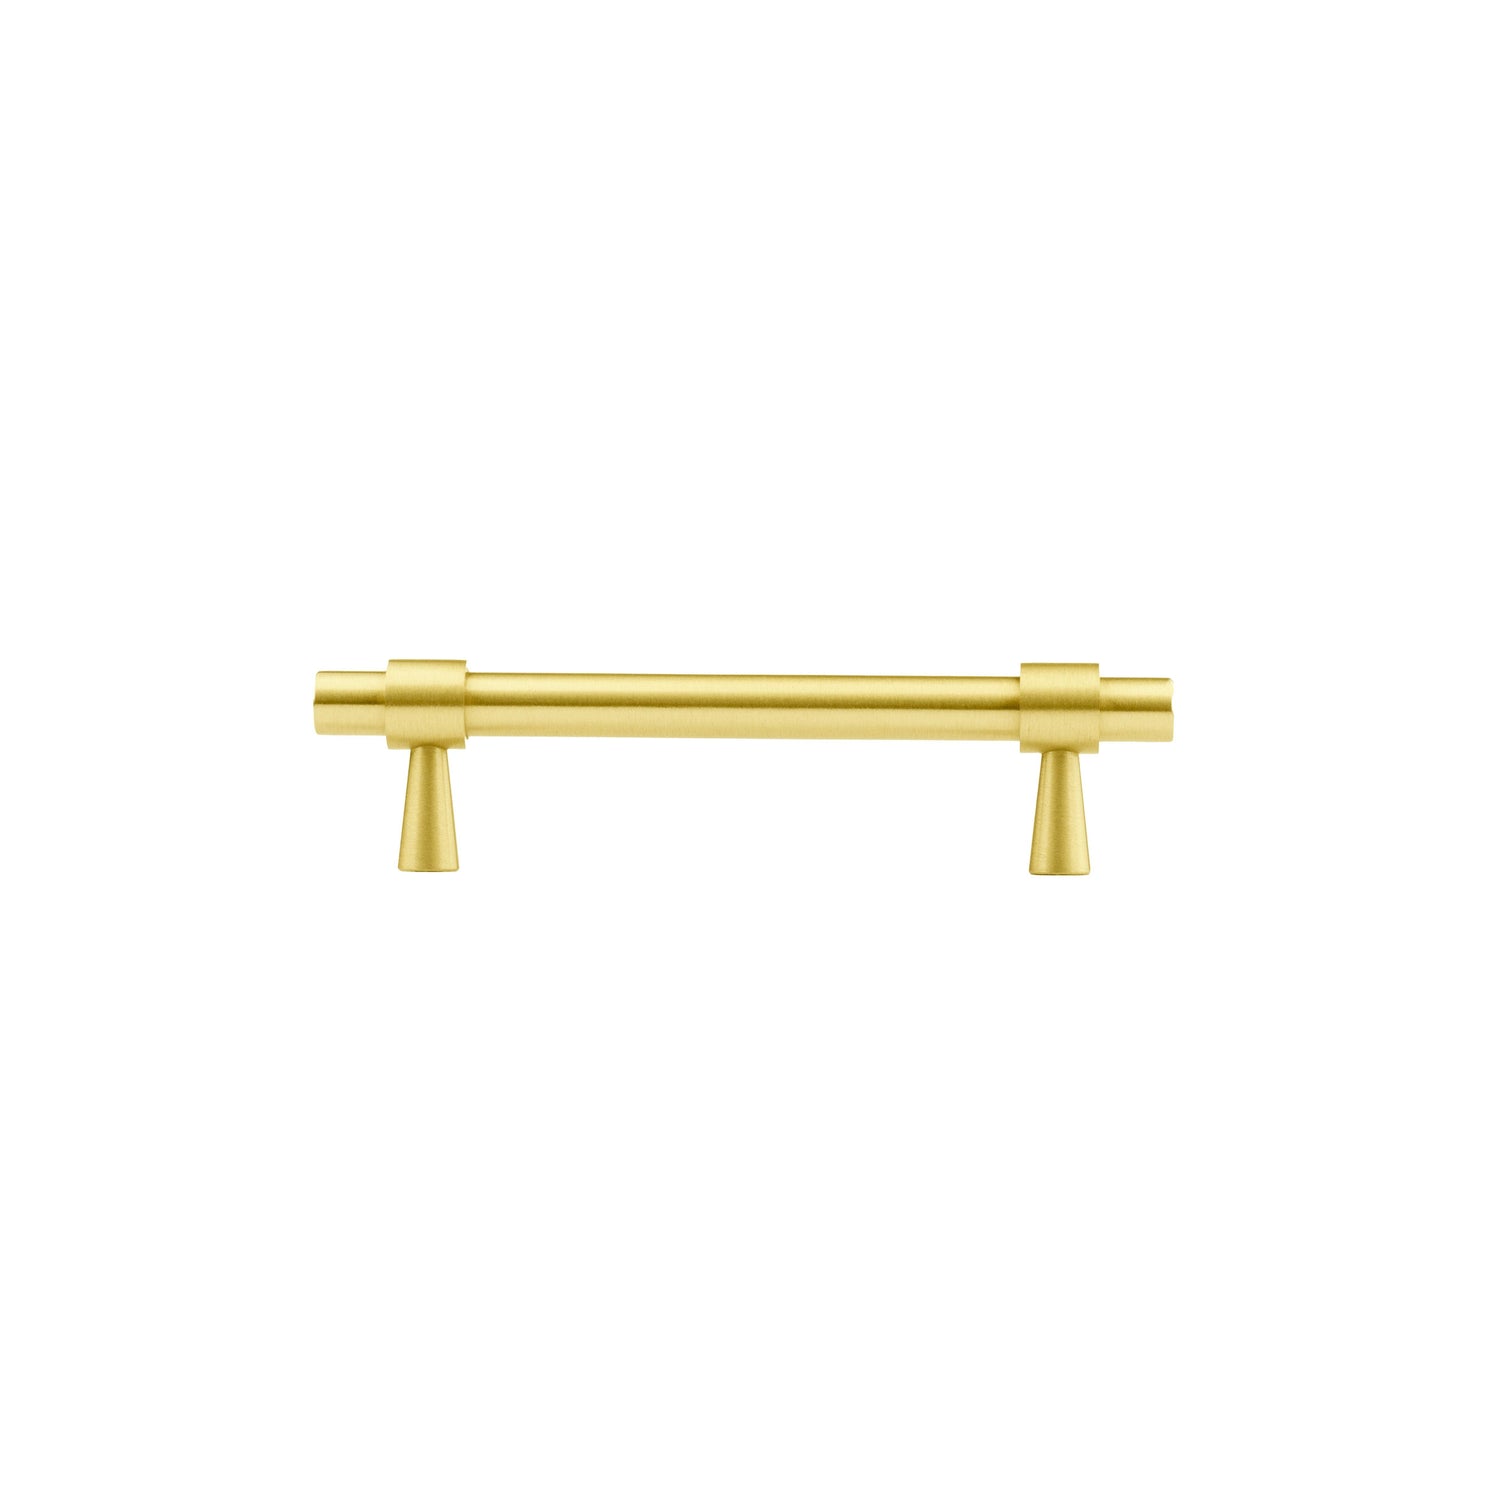 Seraphine Handle Handles 128mm / Gold / Brass - M A N T A R A